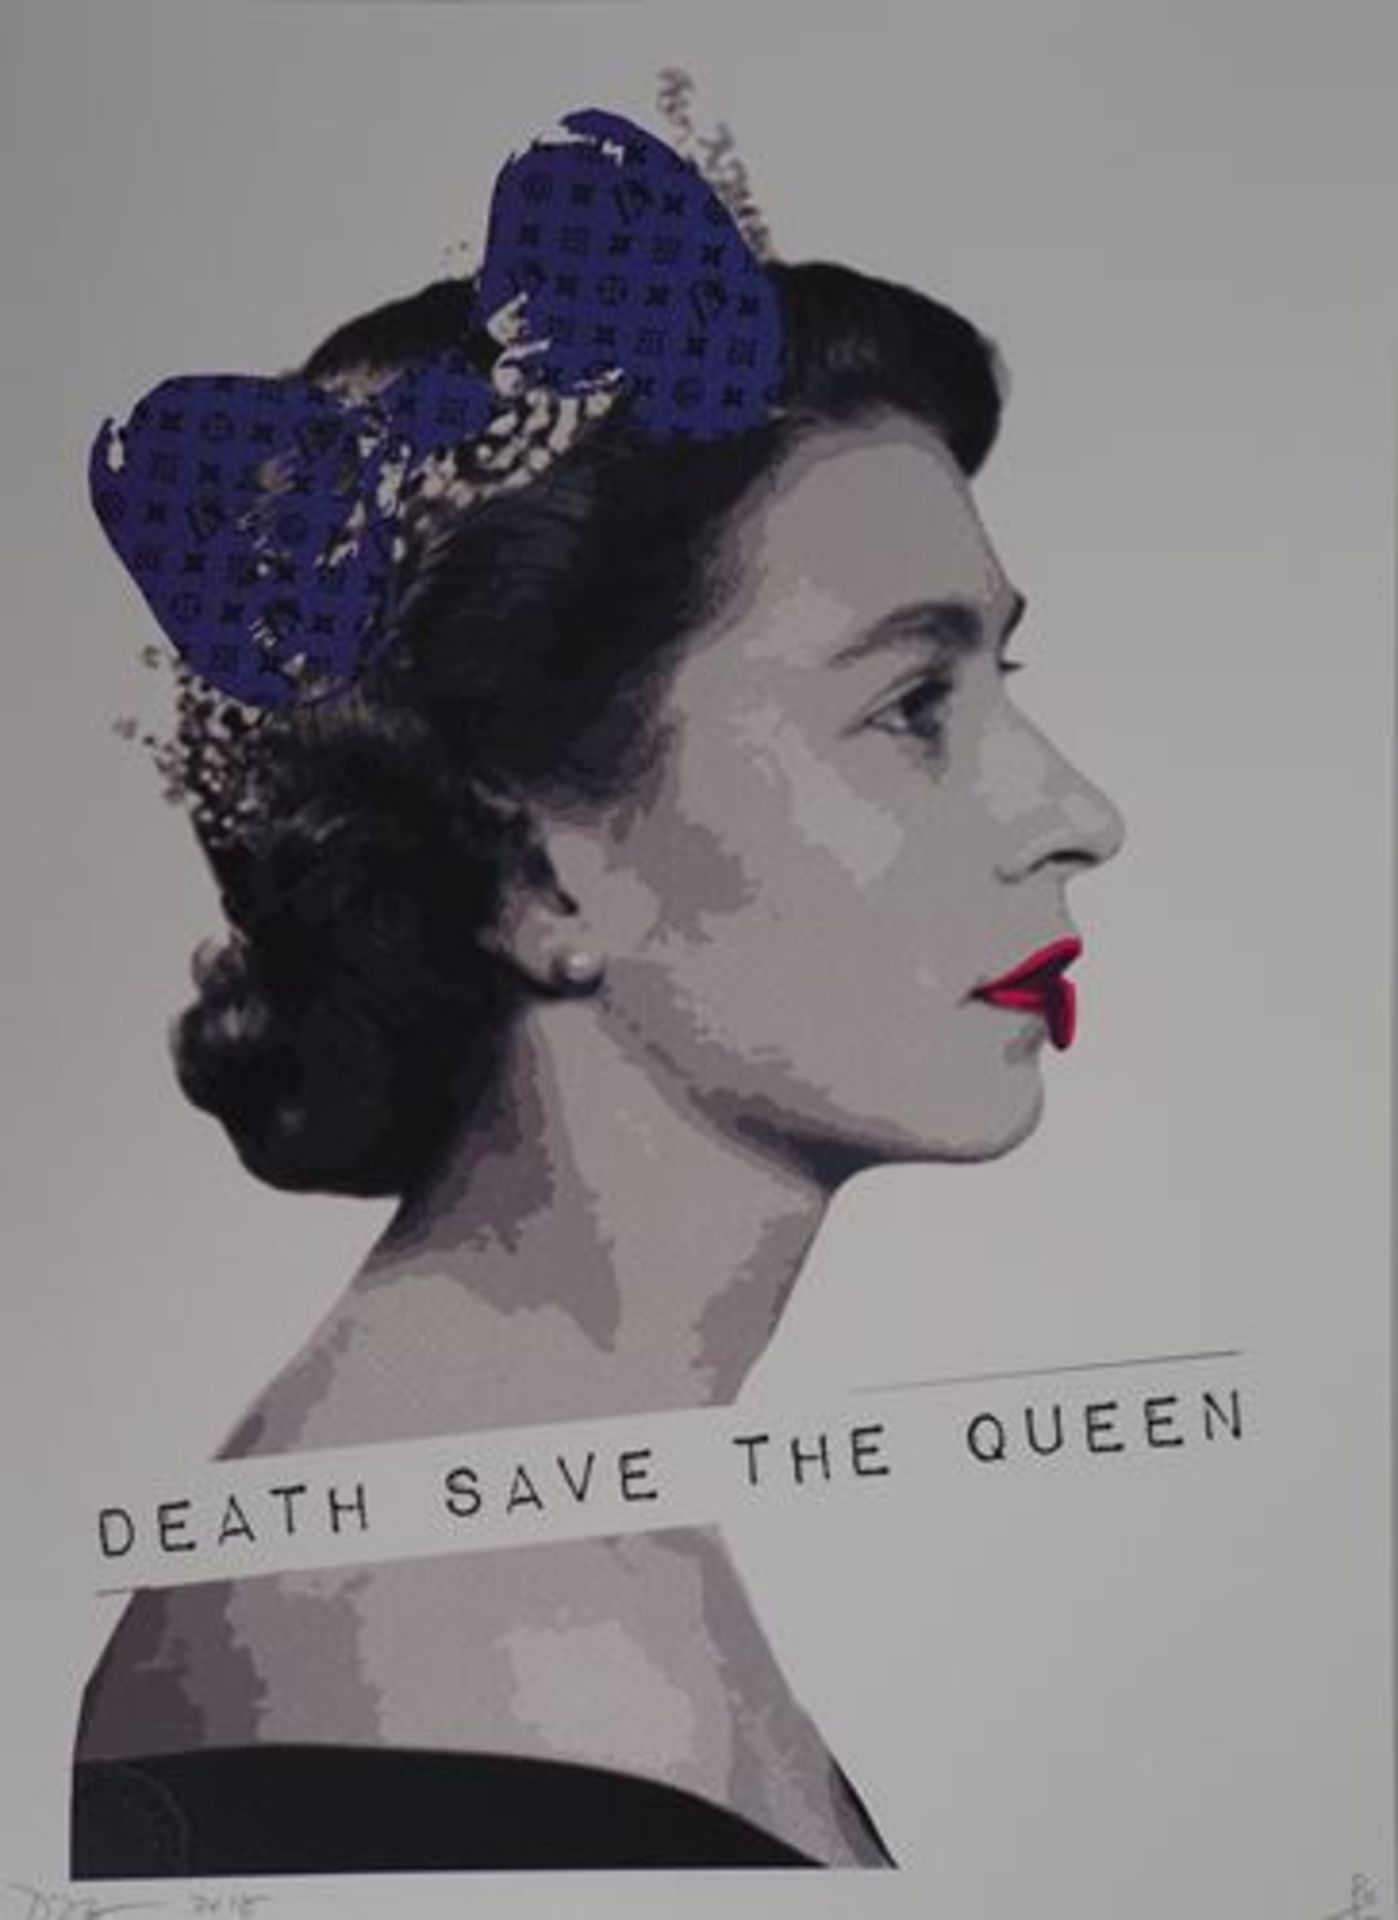 Death NYC Death save the queen Original screenprint by Death NYC - Rising American [...]